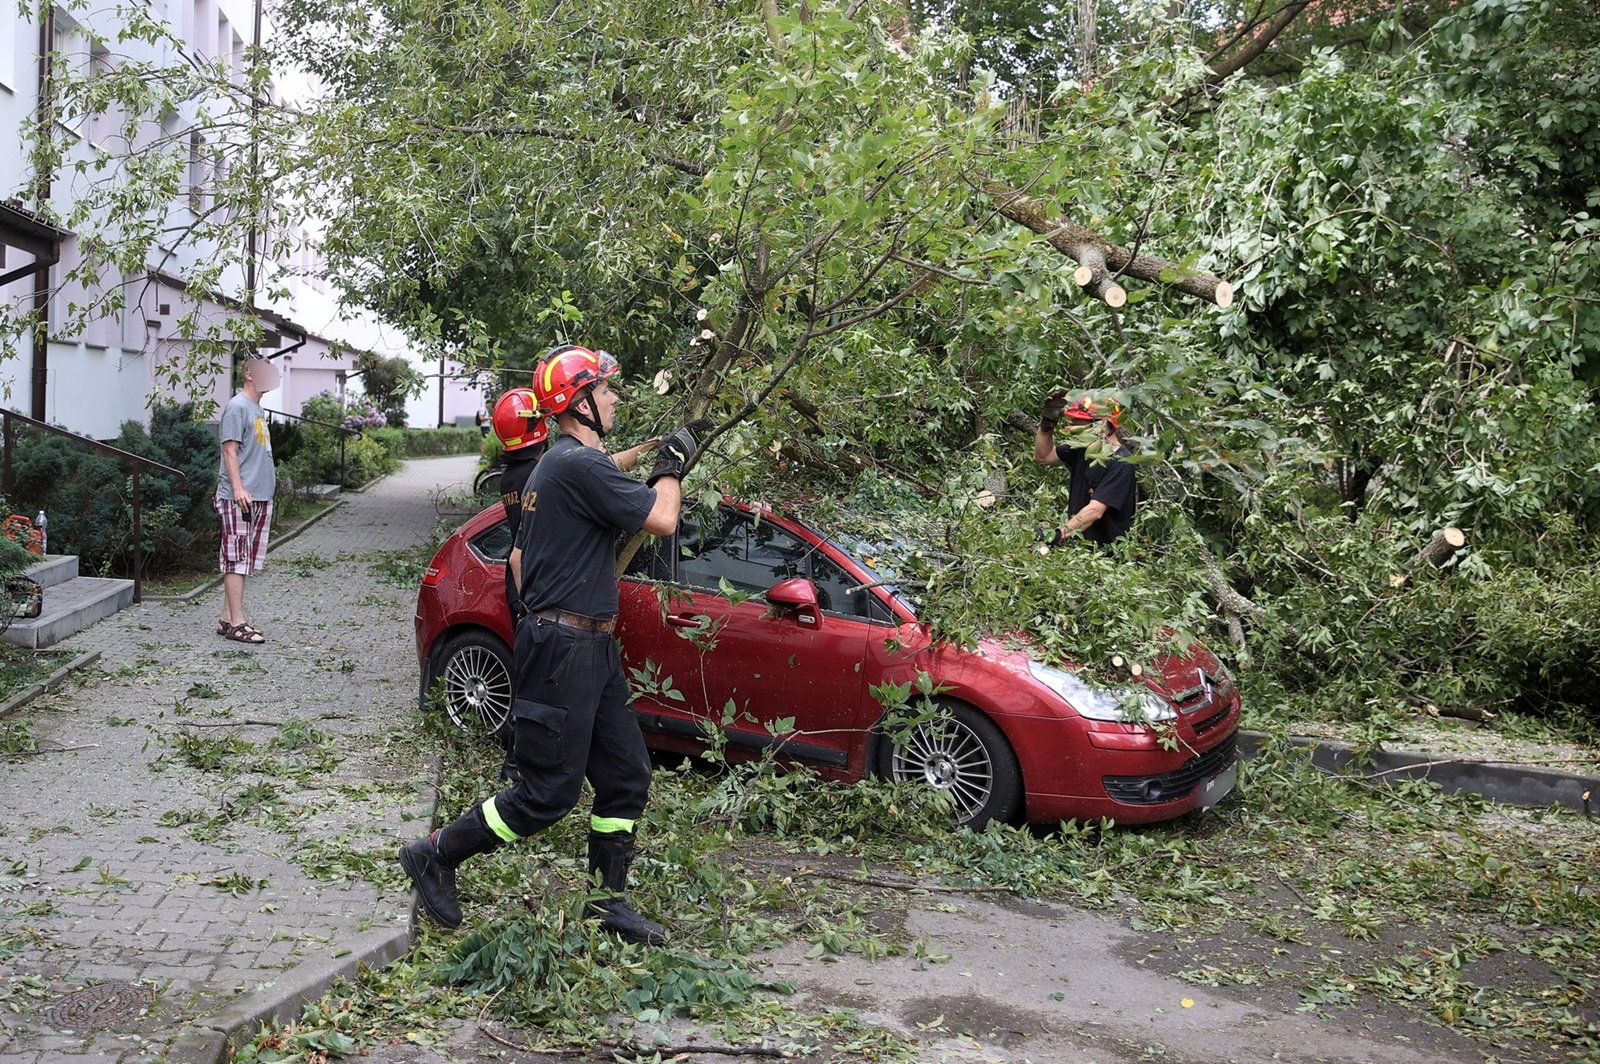 Polish firefighters cut branches from a fallen tree after yesterday's strong winds in Krakow, southern Poland, 24 July 2022.,Image: 709505788, License: Rights-managed, Restrictions: POLAND OUT, Model Release: no, Credit line: Lukasz Gagulski / PAP / Profimedia